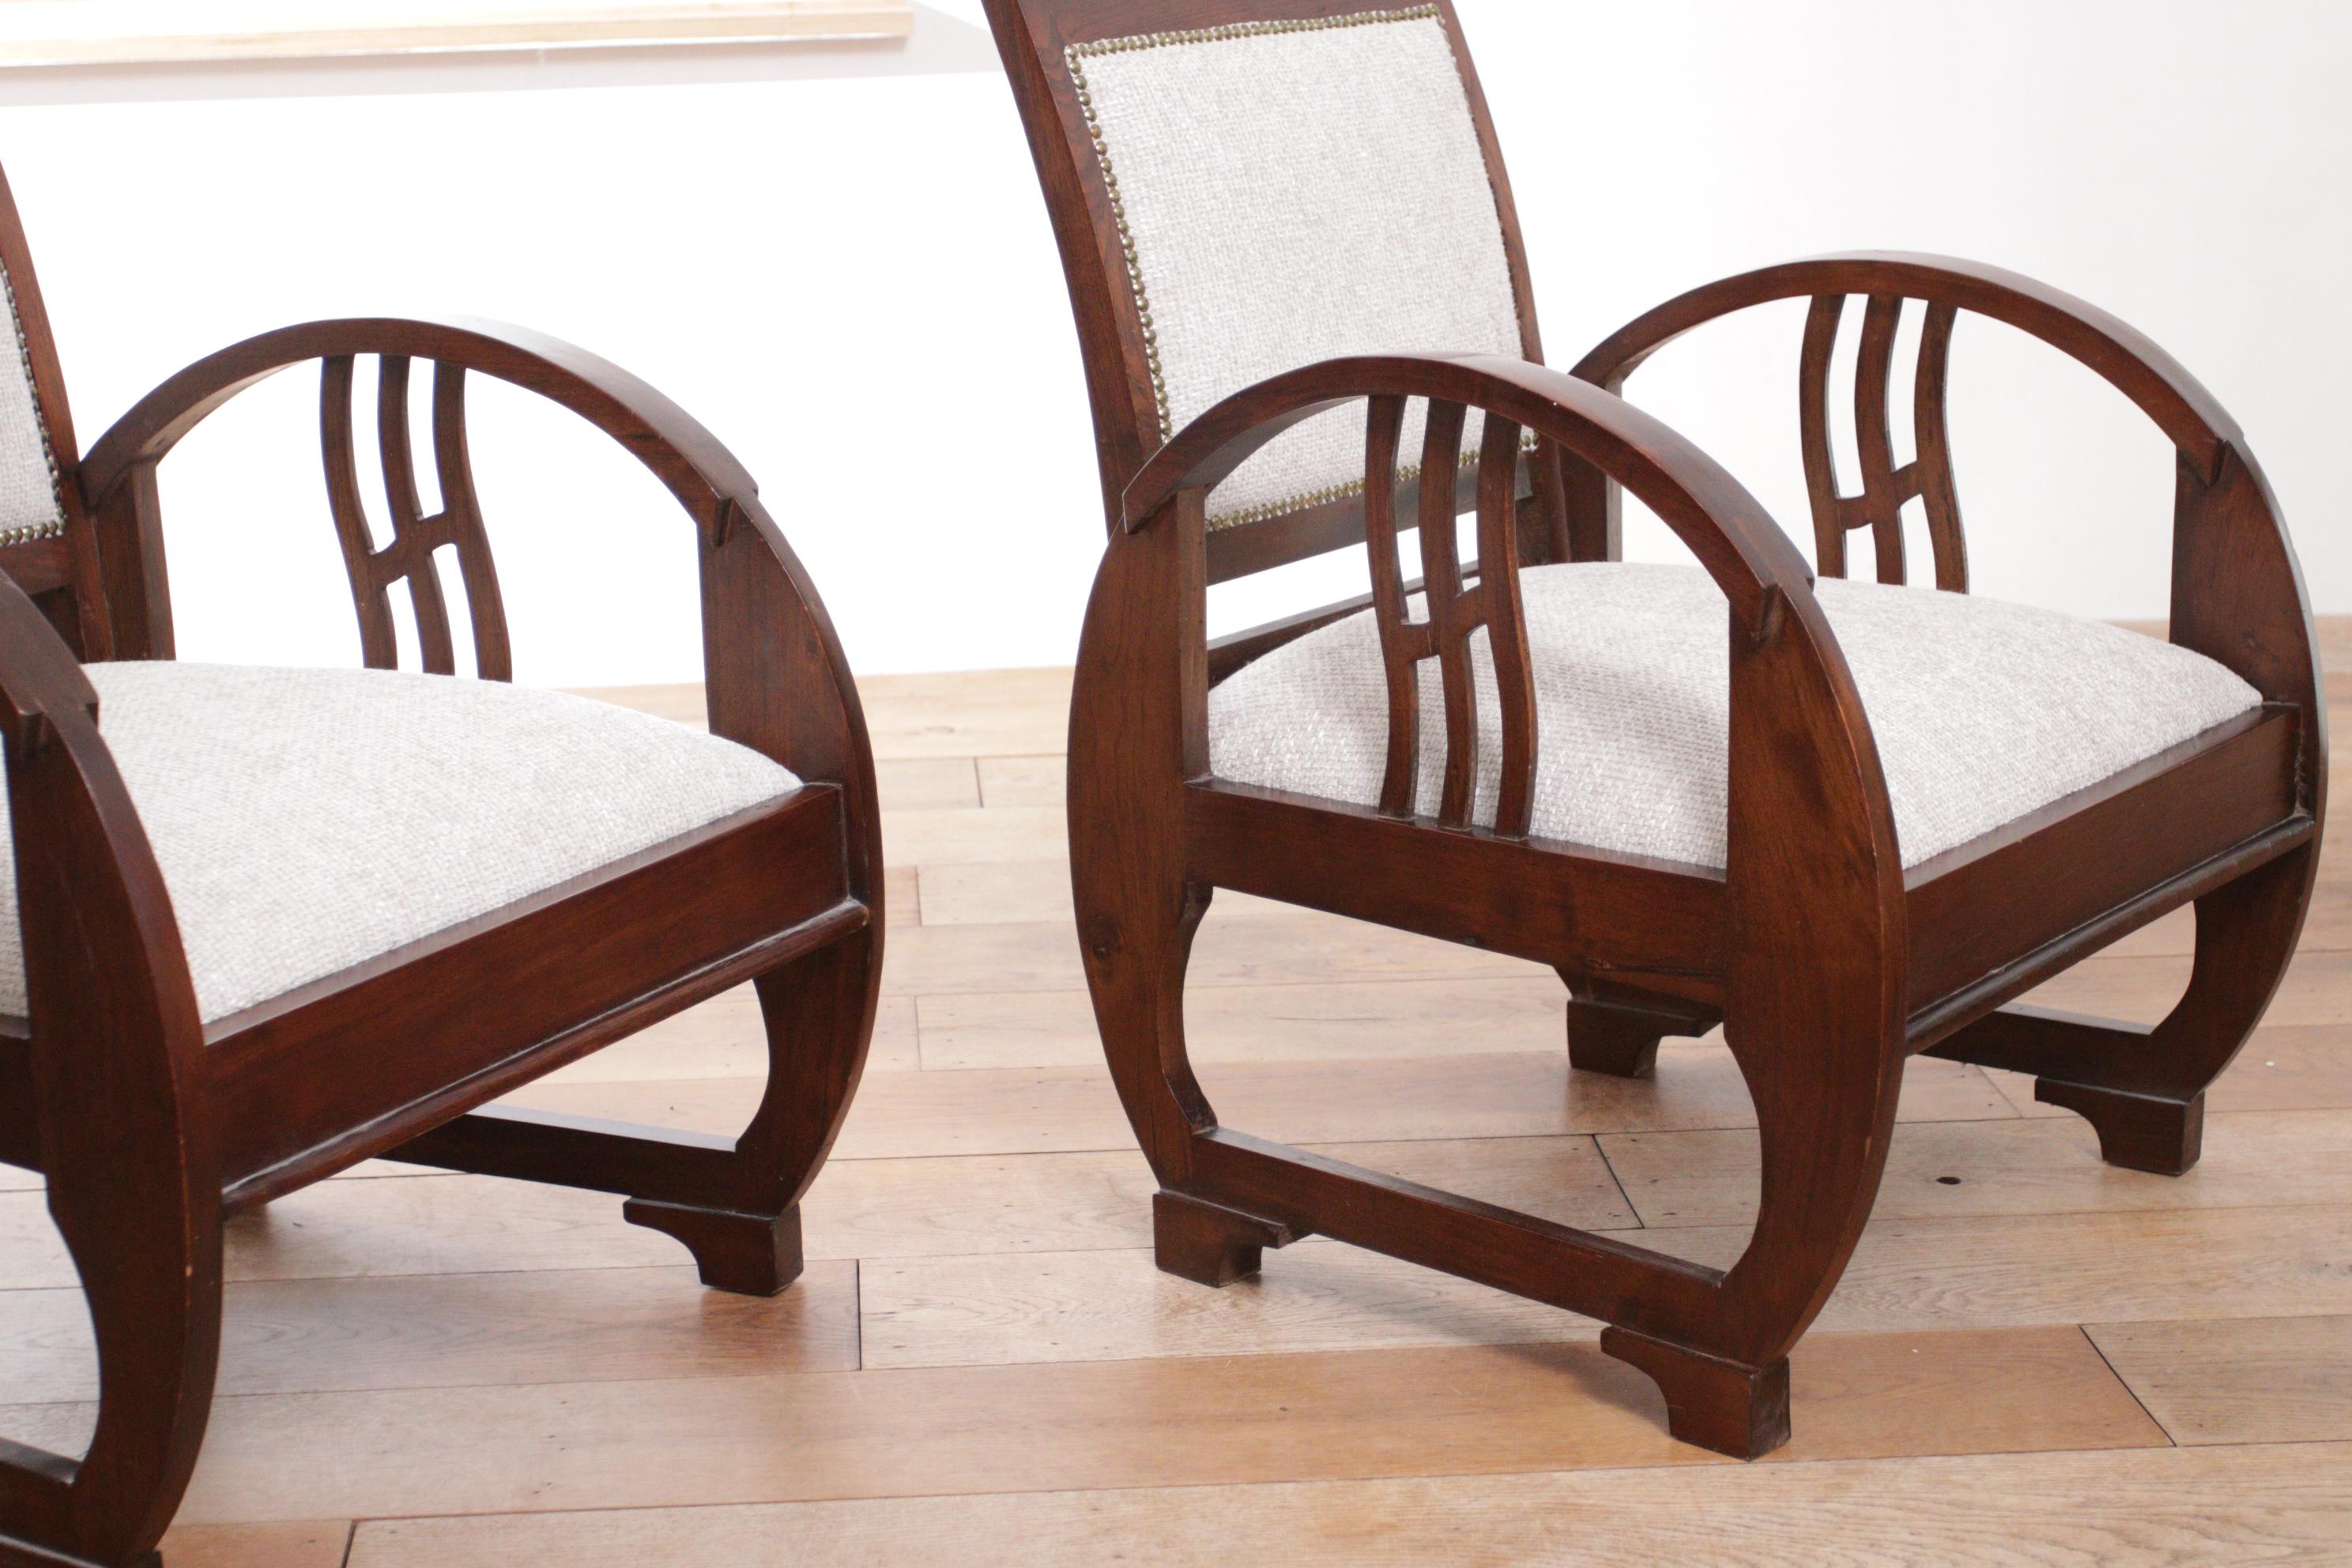 Two Rare Exclusive Elegant Art Deco Vintage French Wooden Armchairs 1930's For Sale 11